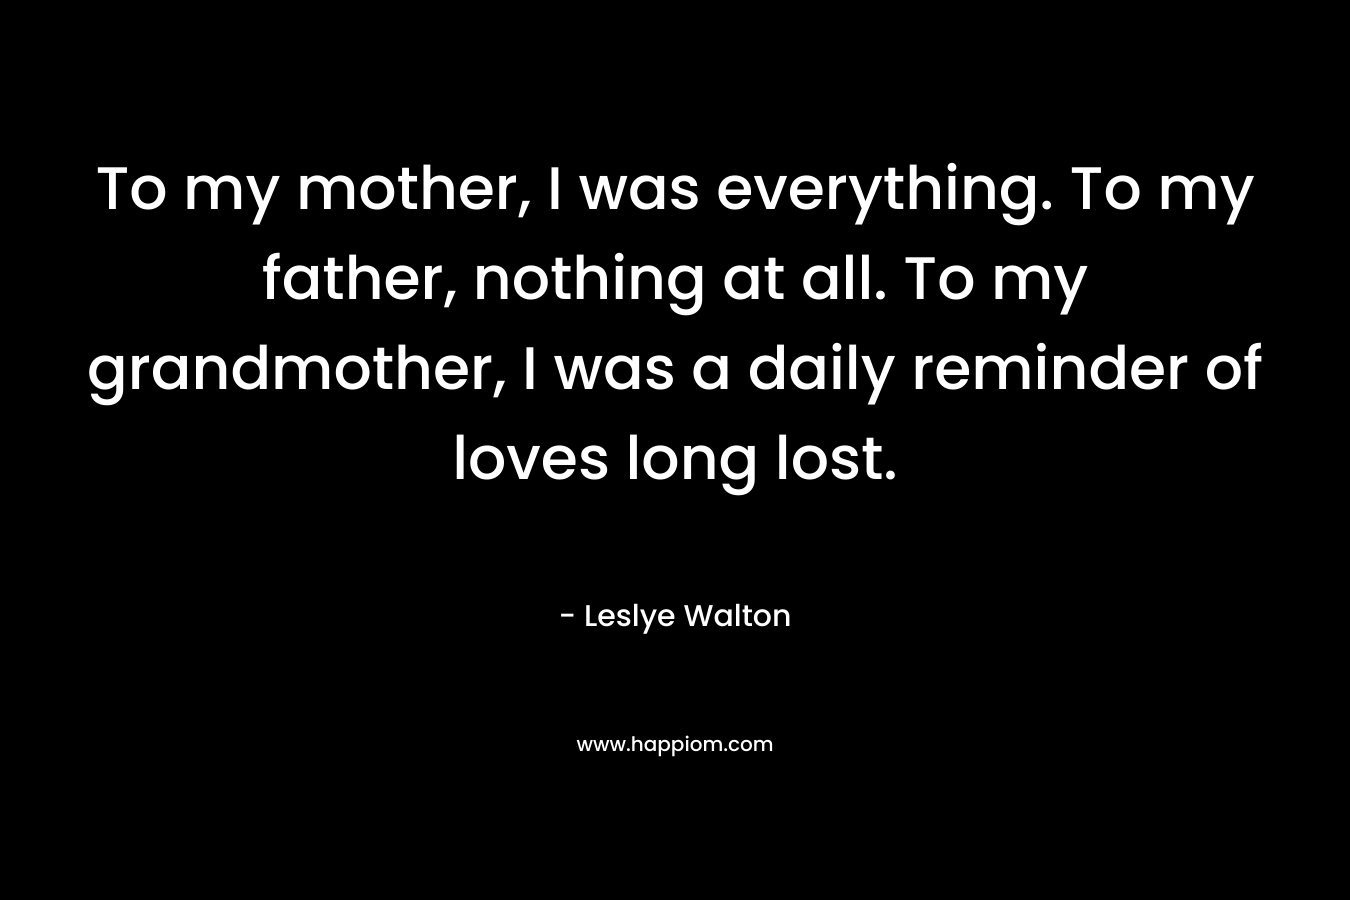 To my mother, I was everything. To my father, nothing at all. To my grandmother, I was a daily reminder of loves long lost.